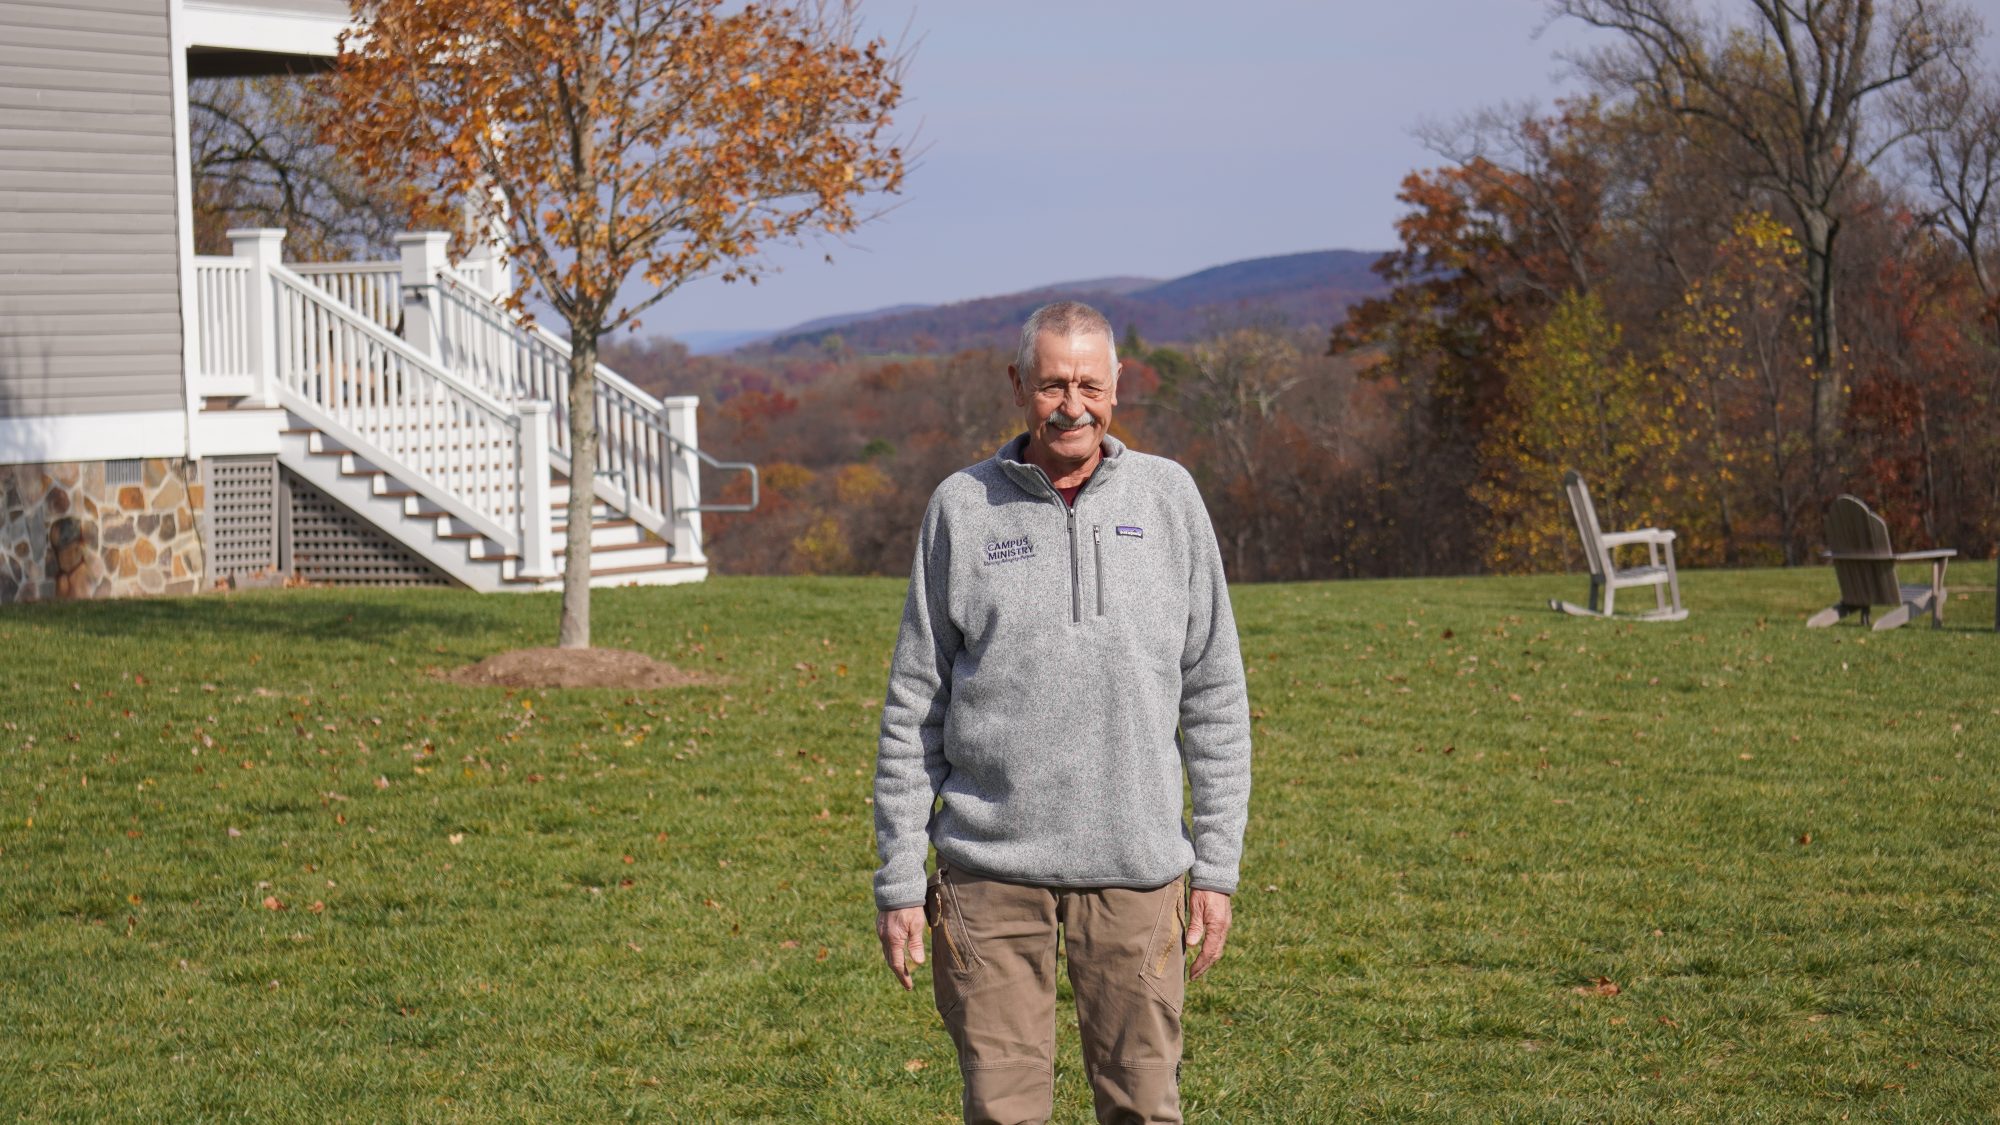 A white man wearing a gray zip-up sweater stands in front of green grass and a mountainous background.